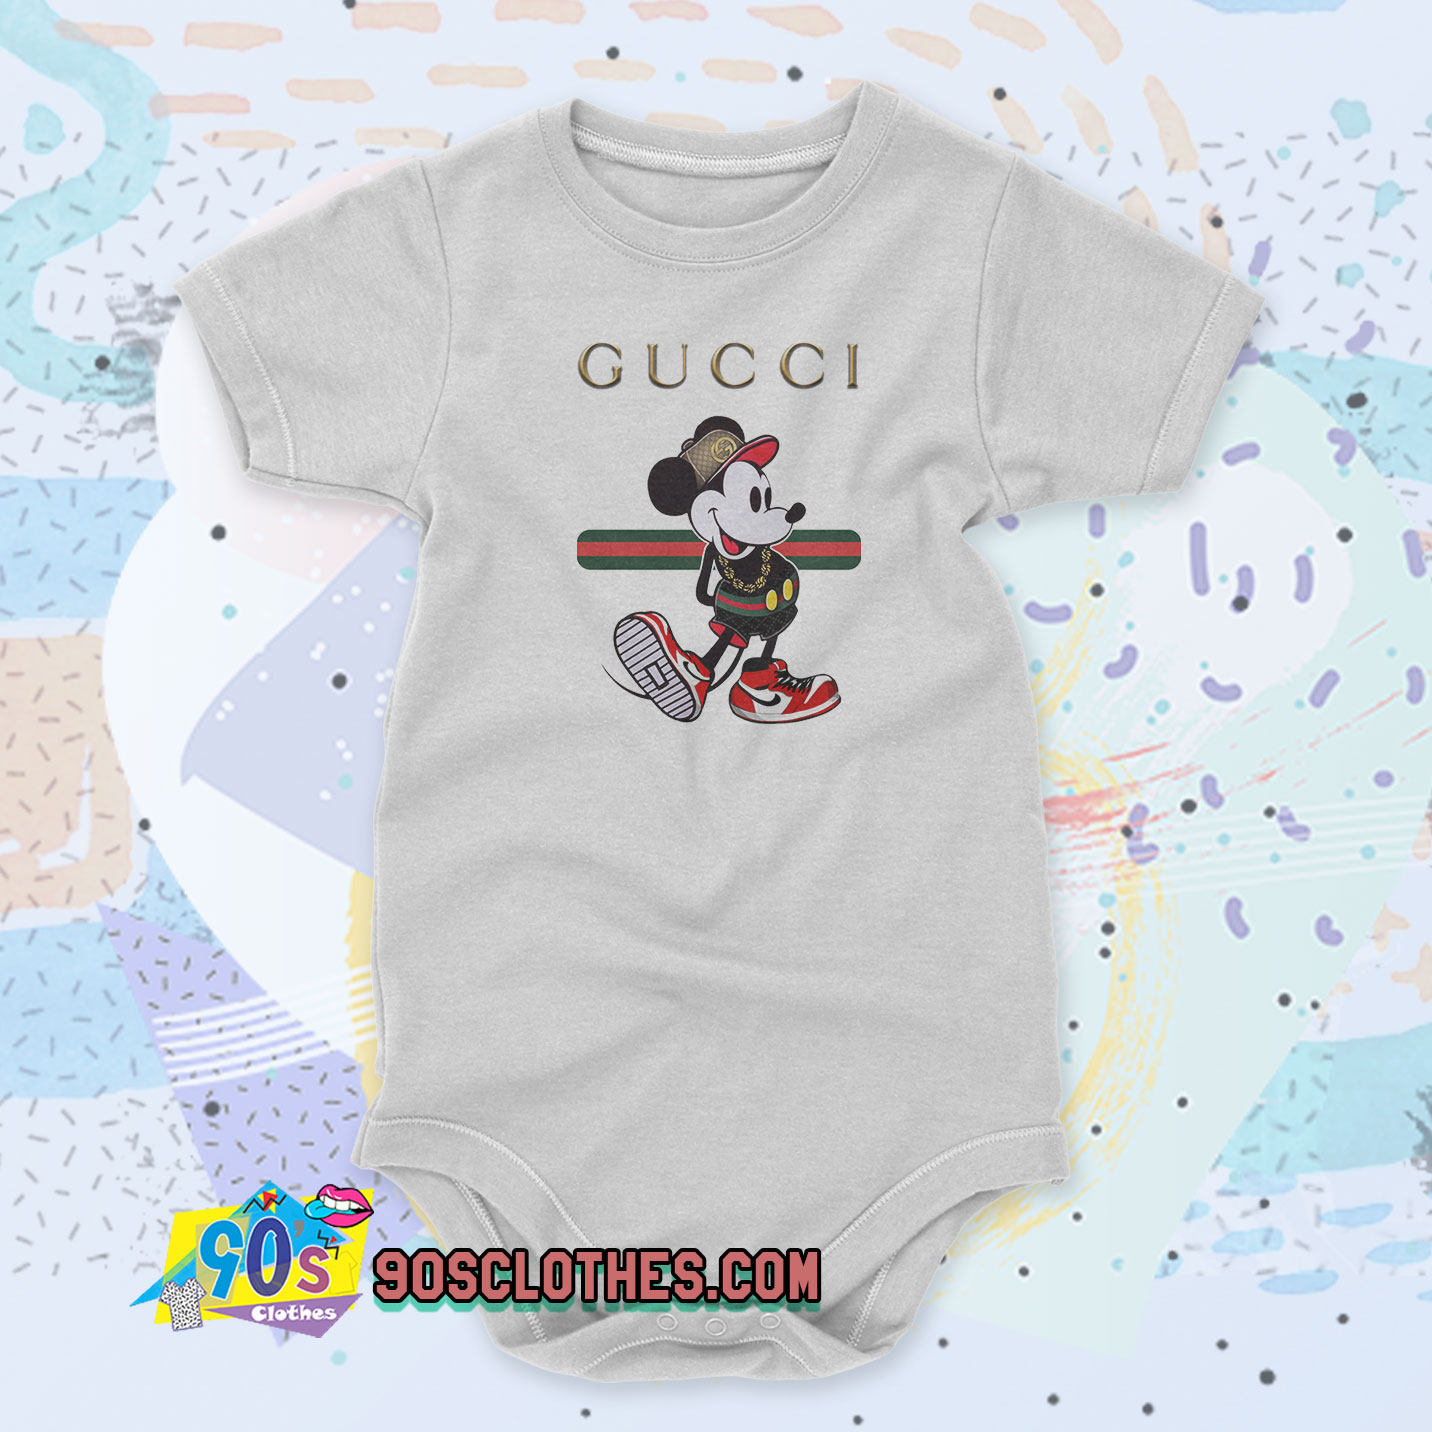 gucci baby clothes